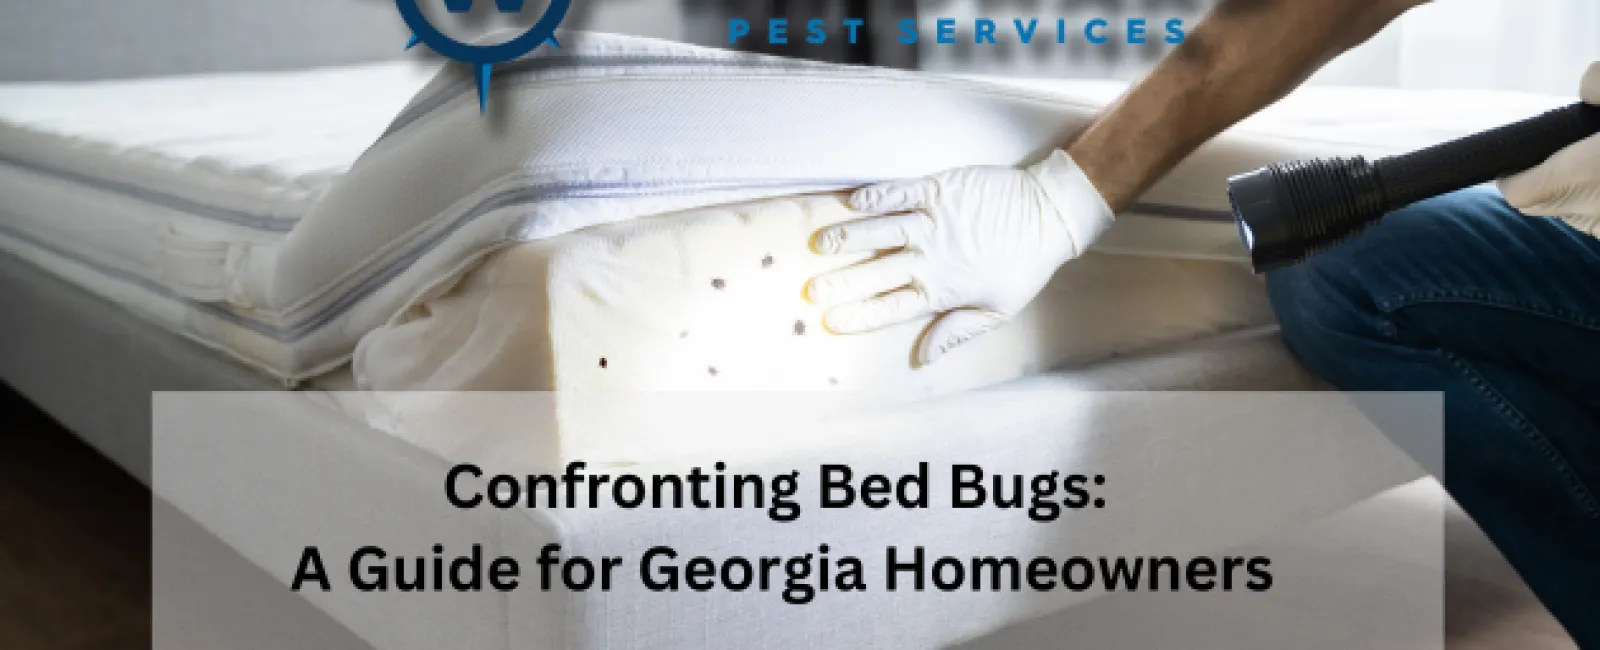 Confronting Bed Bugs: A Guide for Georgia Homeowners